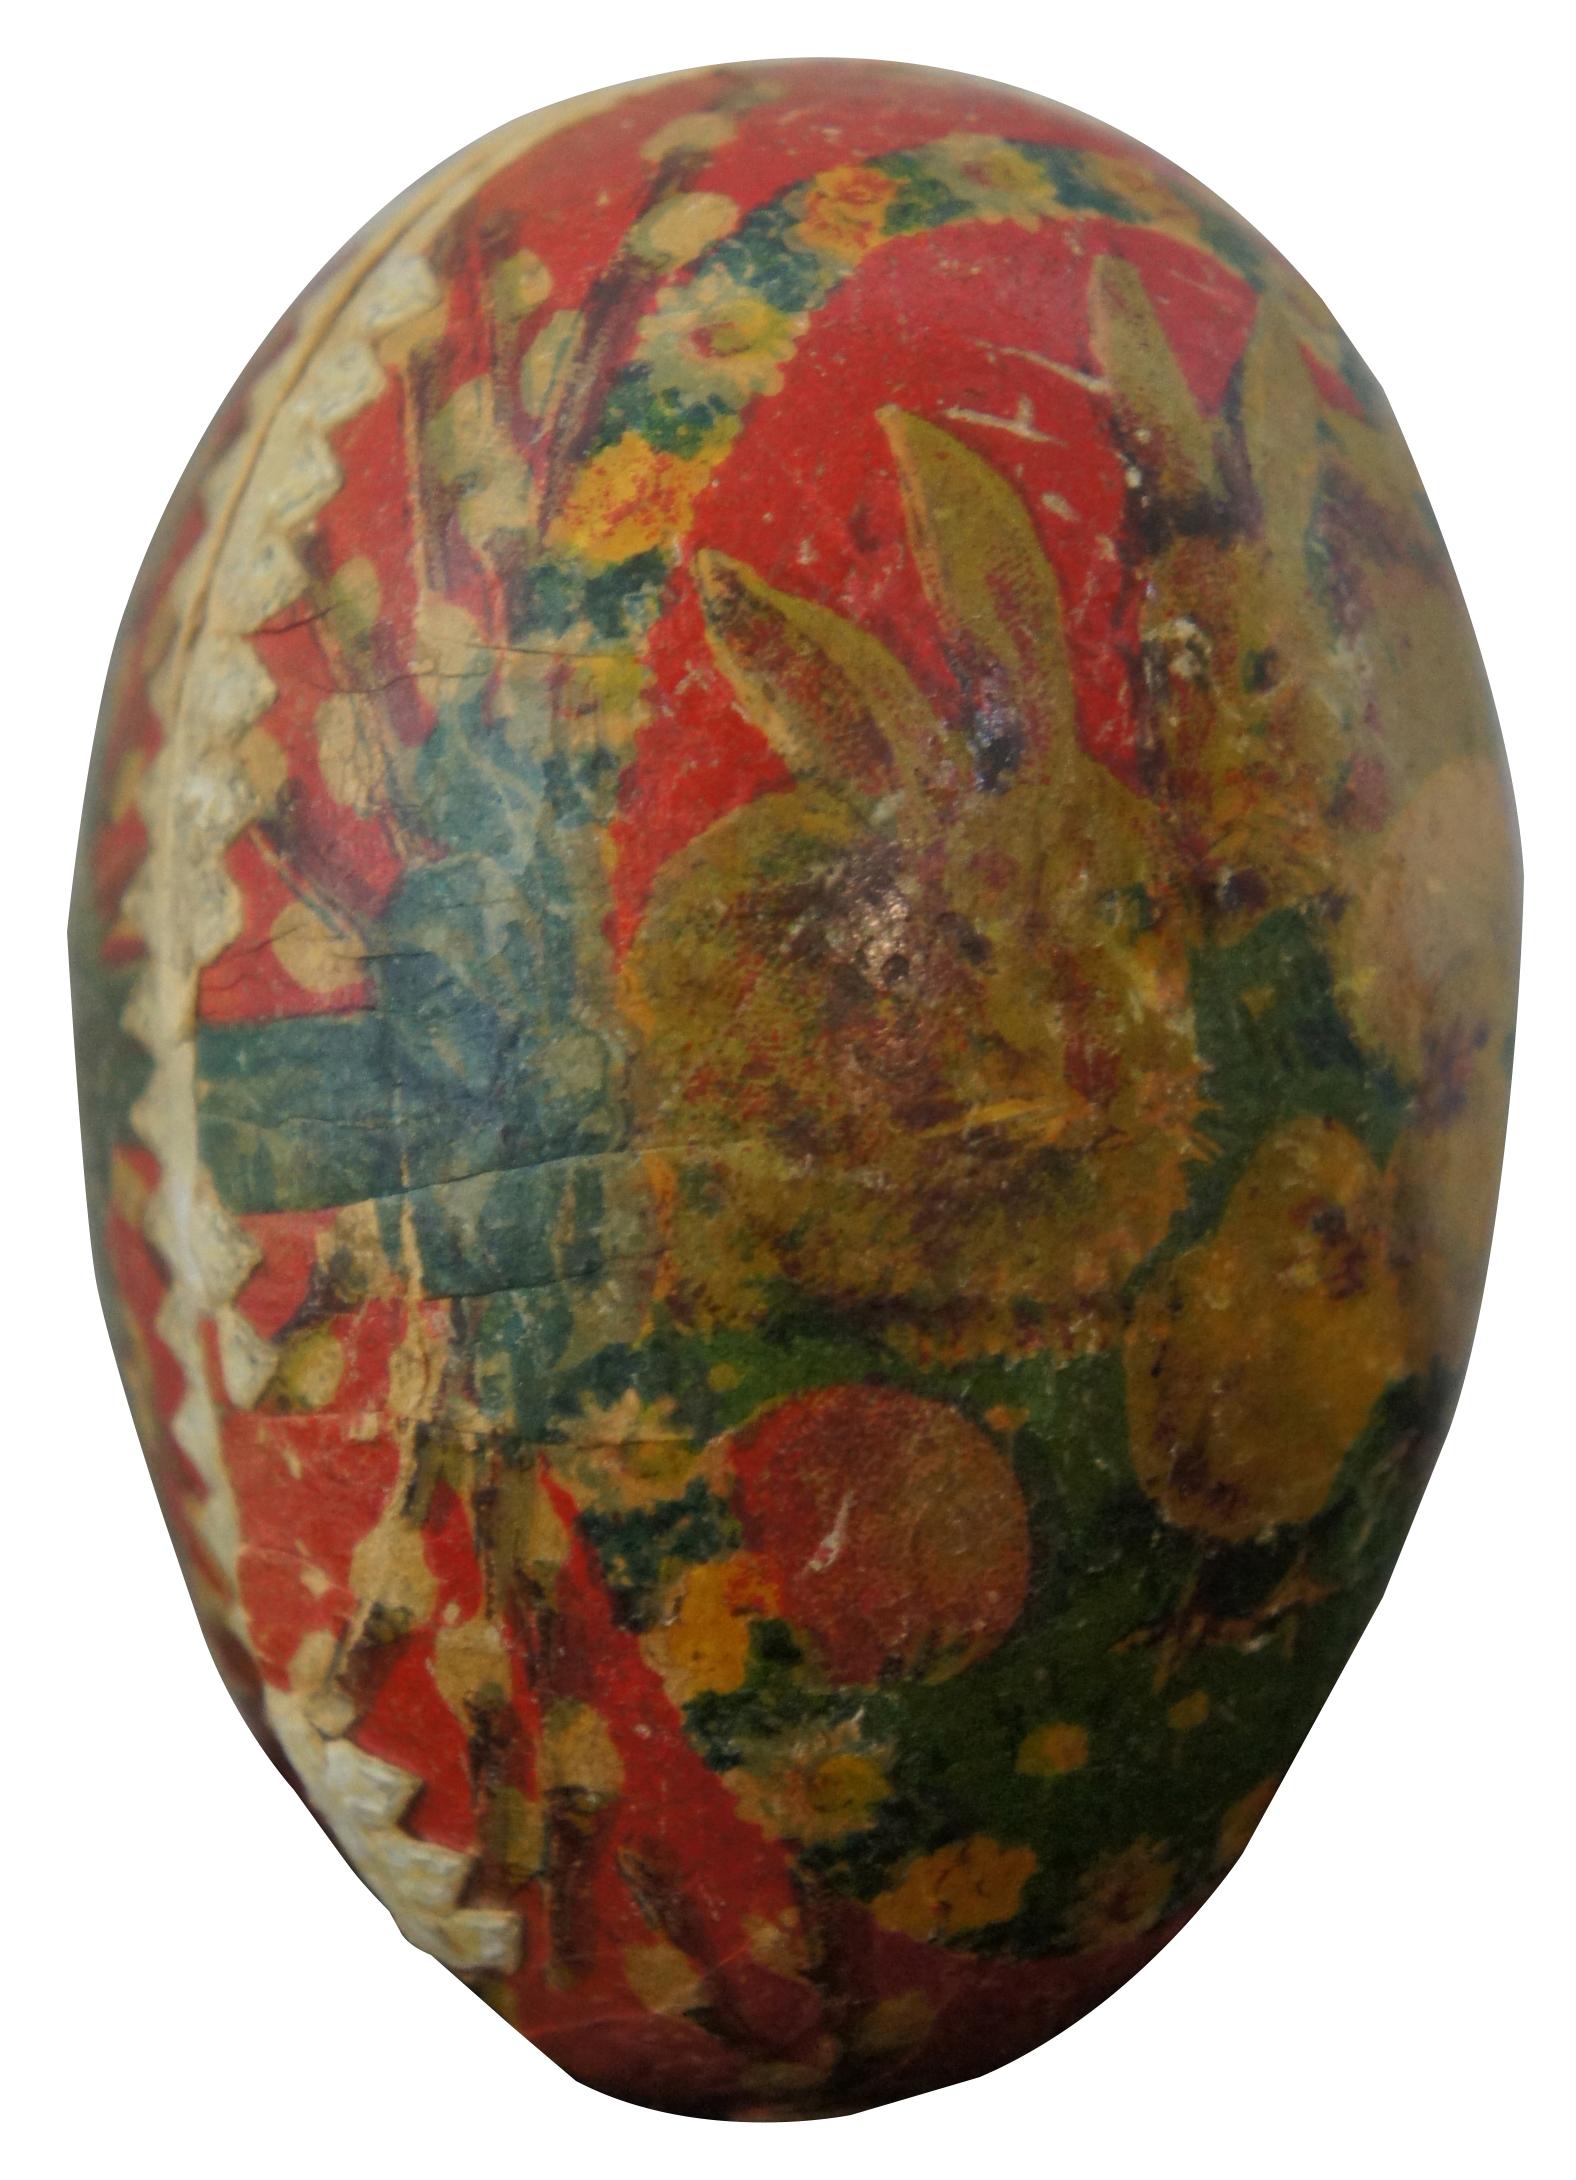 Antique German papier mâché Easter egg candy container, featuring a lithograph landscape of rabbits and chicks in a frame of flowers. Measure: 3”.